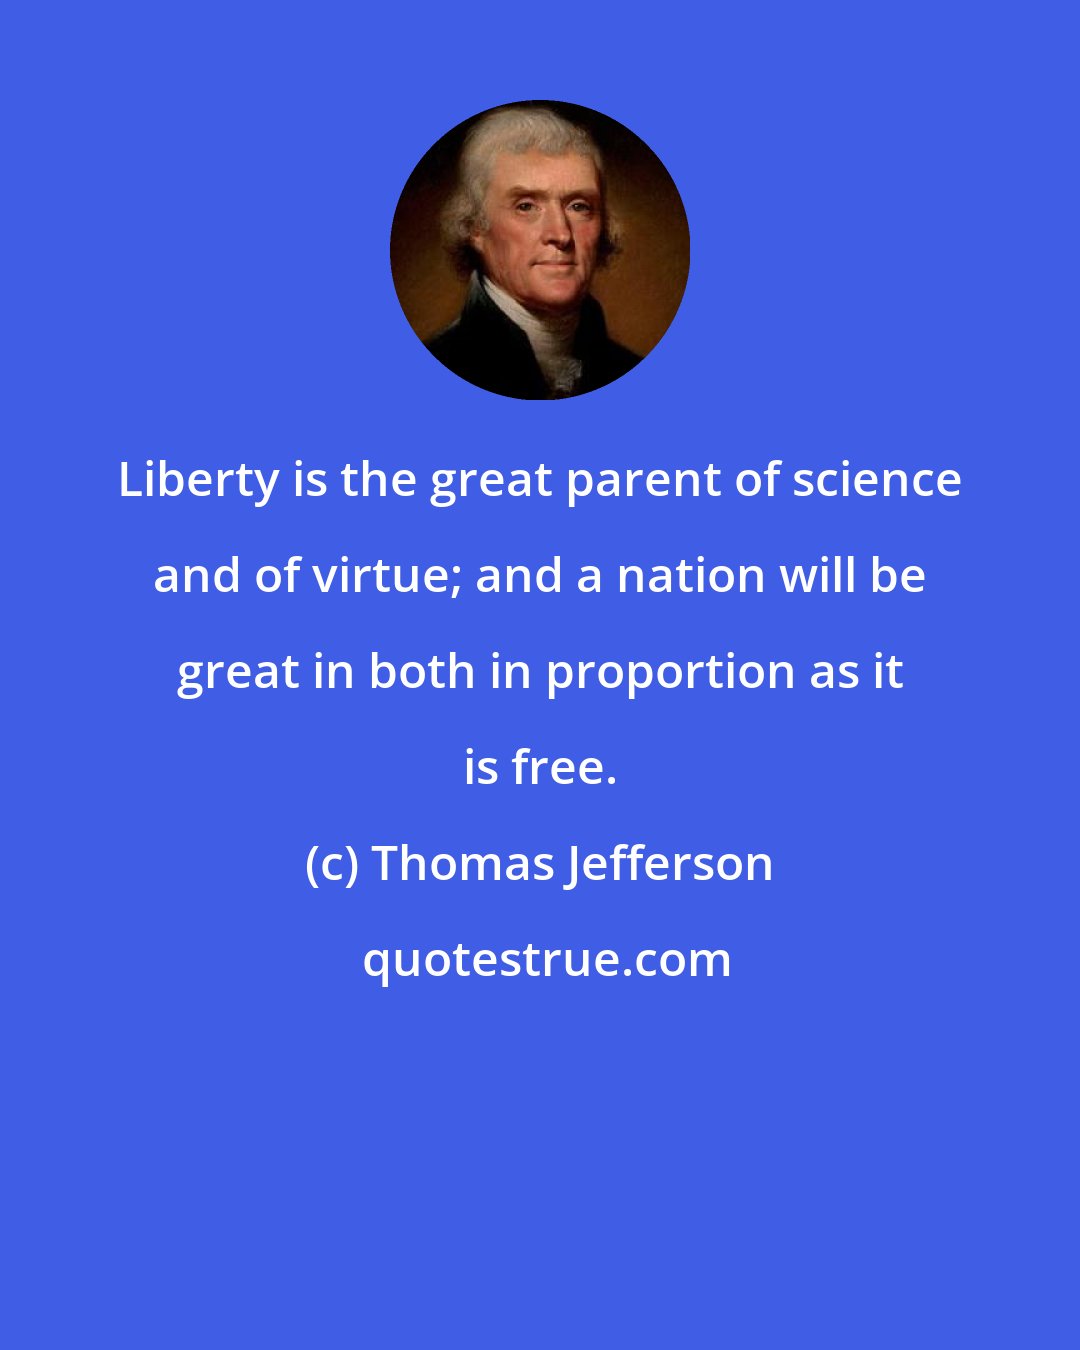 Thomas Jefferson: Liberty is the great parent of science and of virtue; and a nation will be great in both in proportion as it is free.